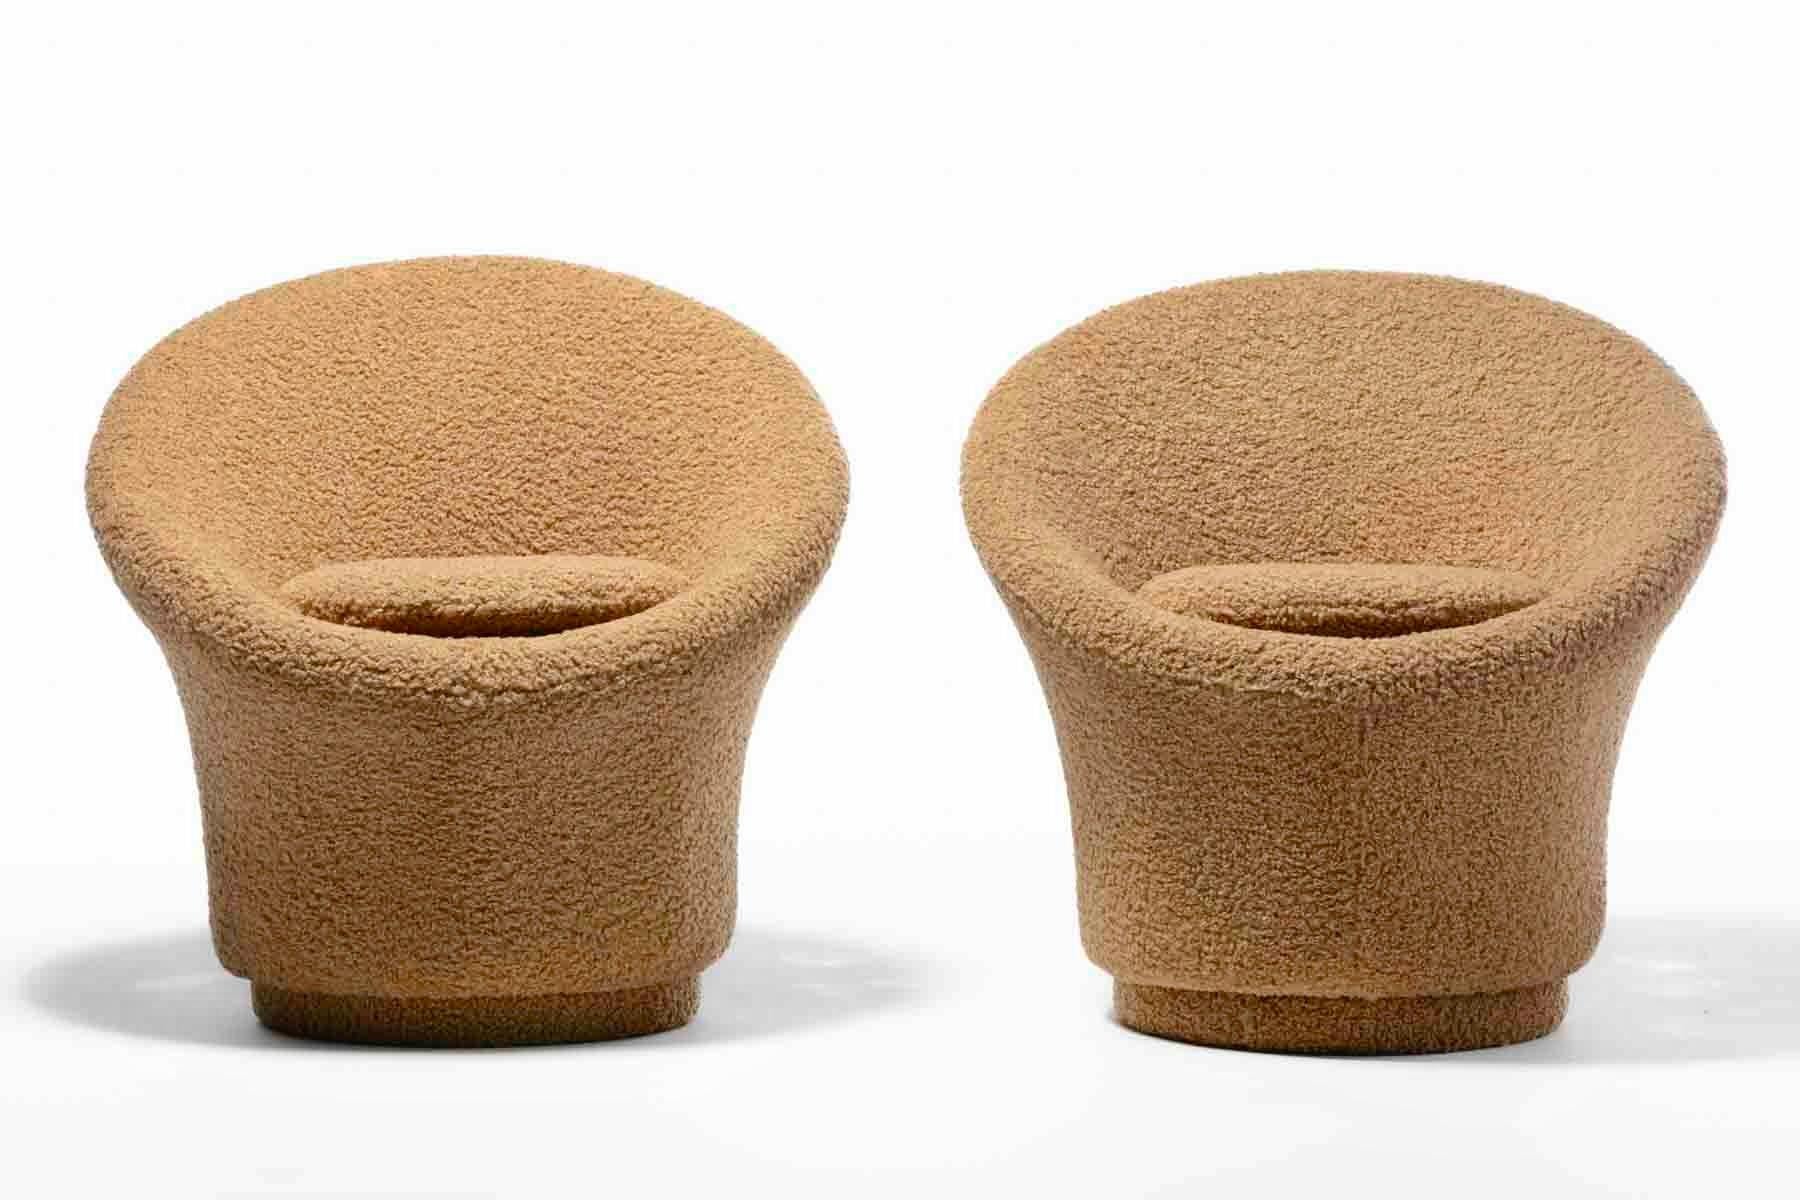 French Modern feels to the max with these Pierre Paulin style Mushroom Swivel Chairs that immediately transport you to that Parisian flat you rented decades ago. A silhouette that's as sexy now as it was then - perpetual high French design. The